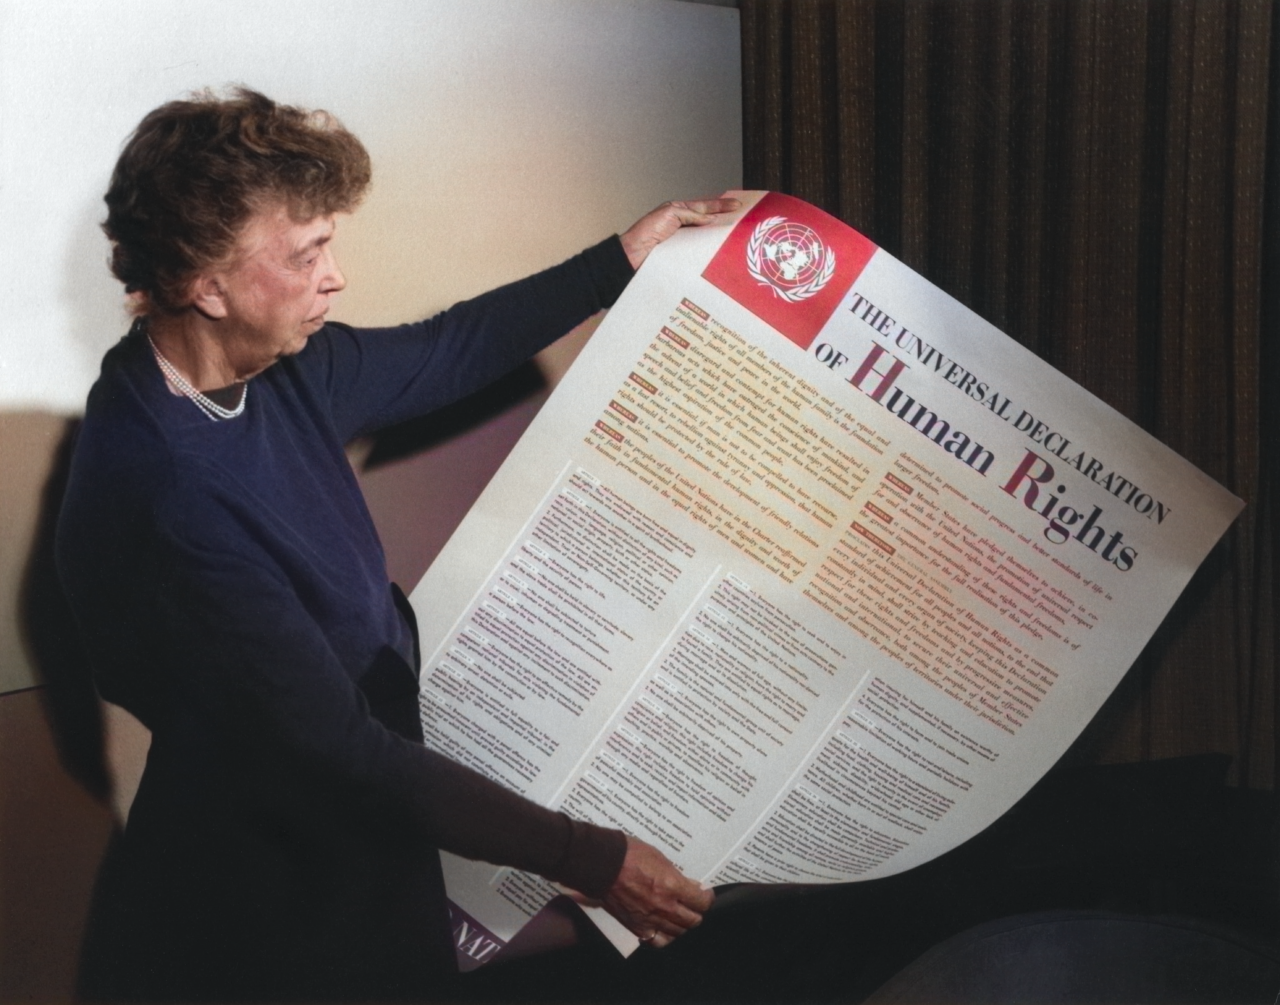 An older woman holding a large version of the Universal Declaration of Human Rights